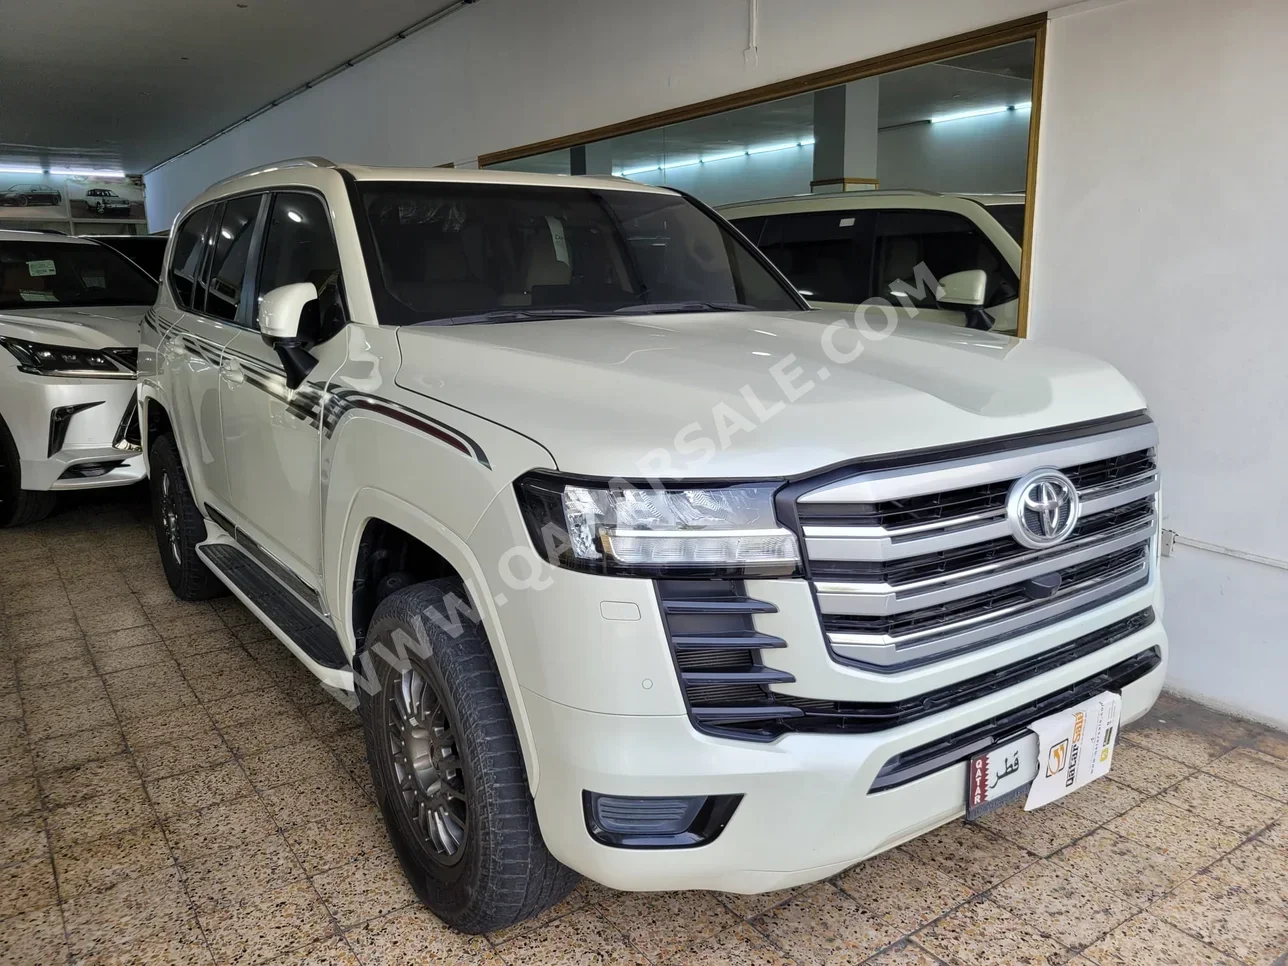 Toyota  Land Cruiser  GXR Twin Turbo  2022  Automatic  88,000 Km  6 Cylinder  Four Wheel Drive (4WD)  SUV  White  With Warranty